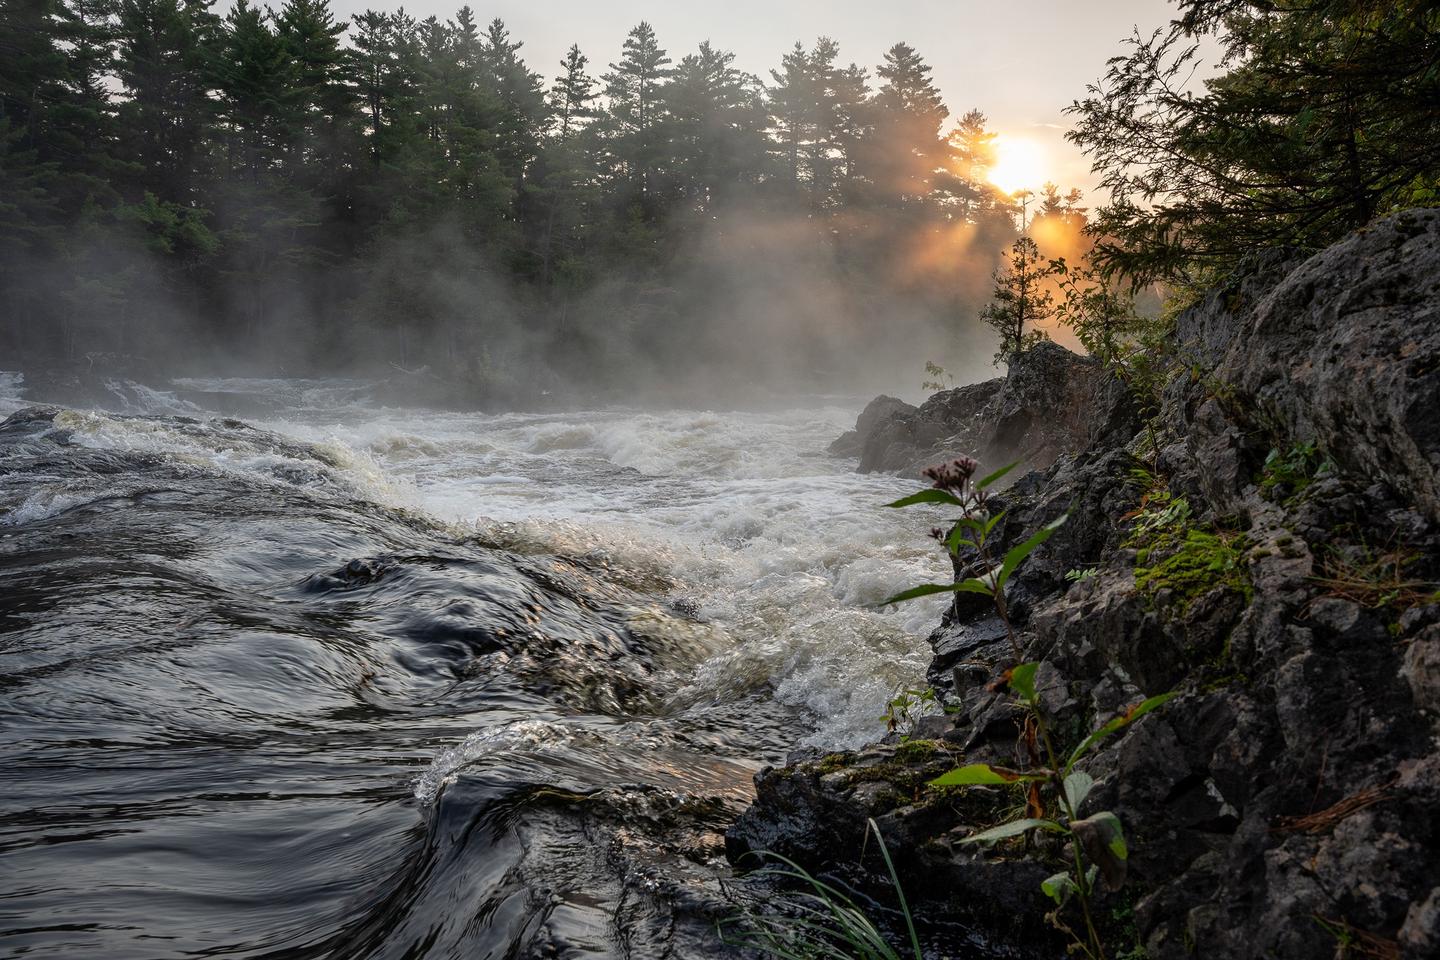 A close up view of a rushing river rapid with the forest in the distance and rocks to the right.Enjoy the beautiful sounds and views of the East Branch of the Penobscot River from this campsite.